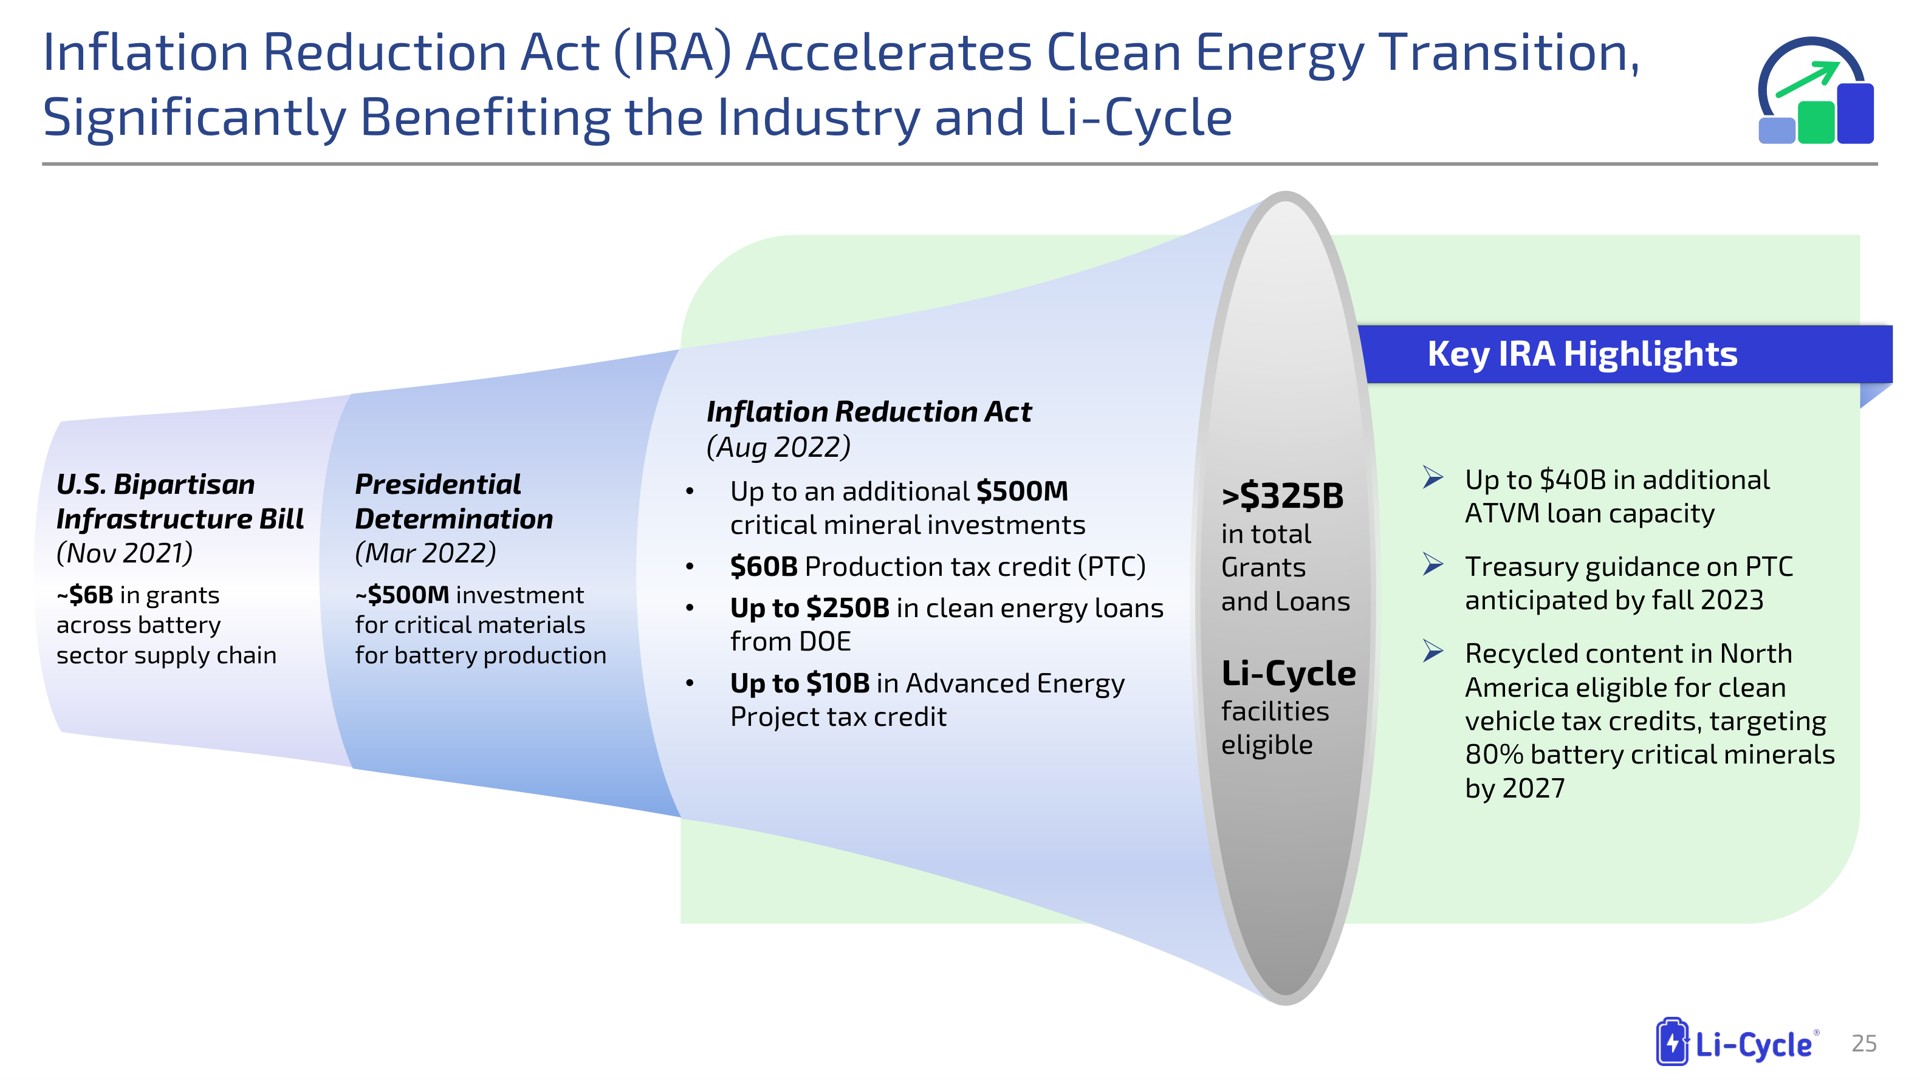 inflation reduction act accelerates clean energy transition significantly benefiting the industry and cycle | Li-Cycle